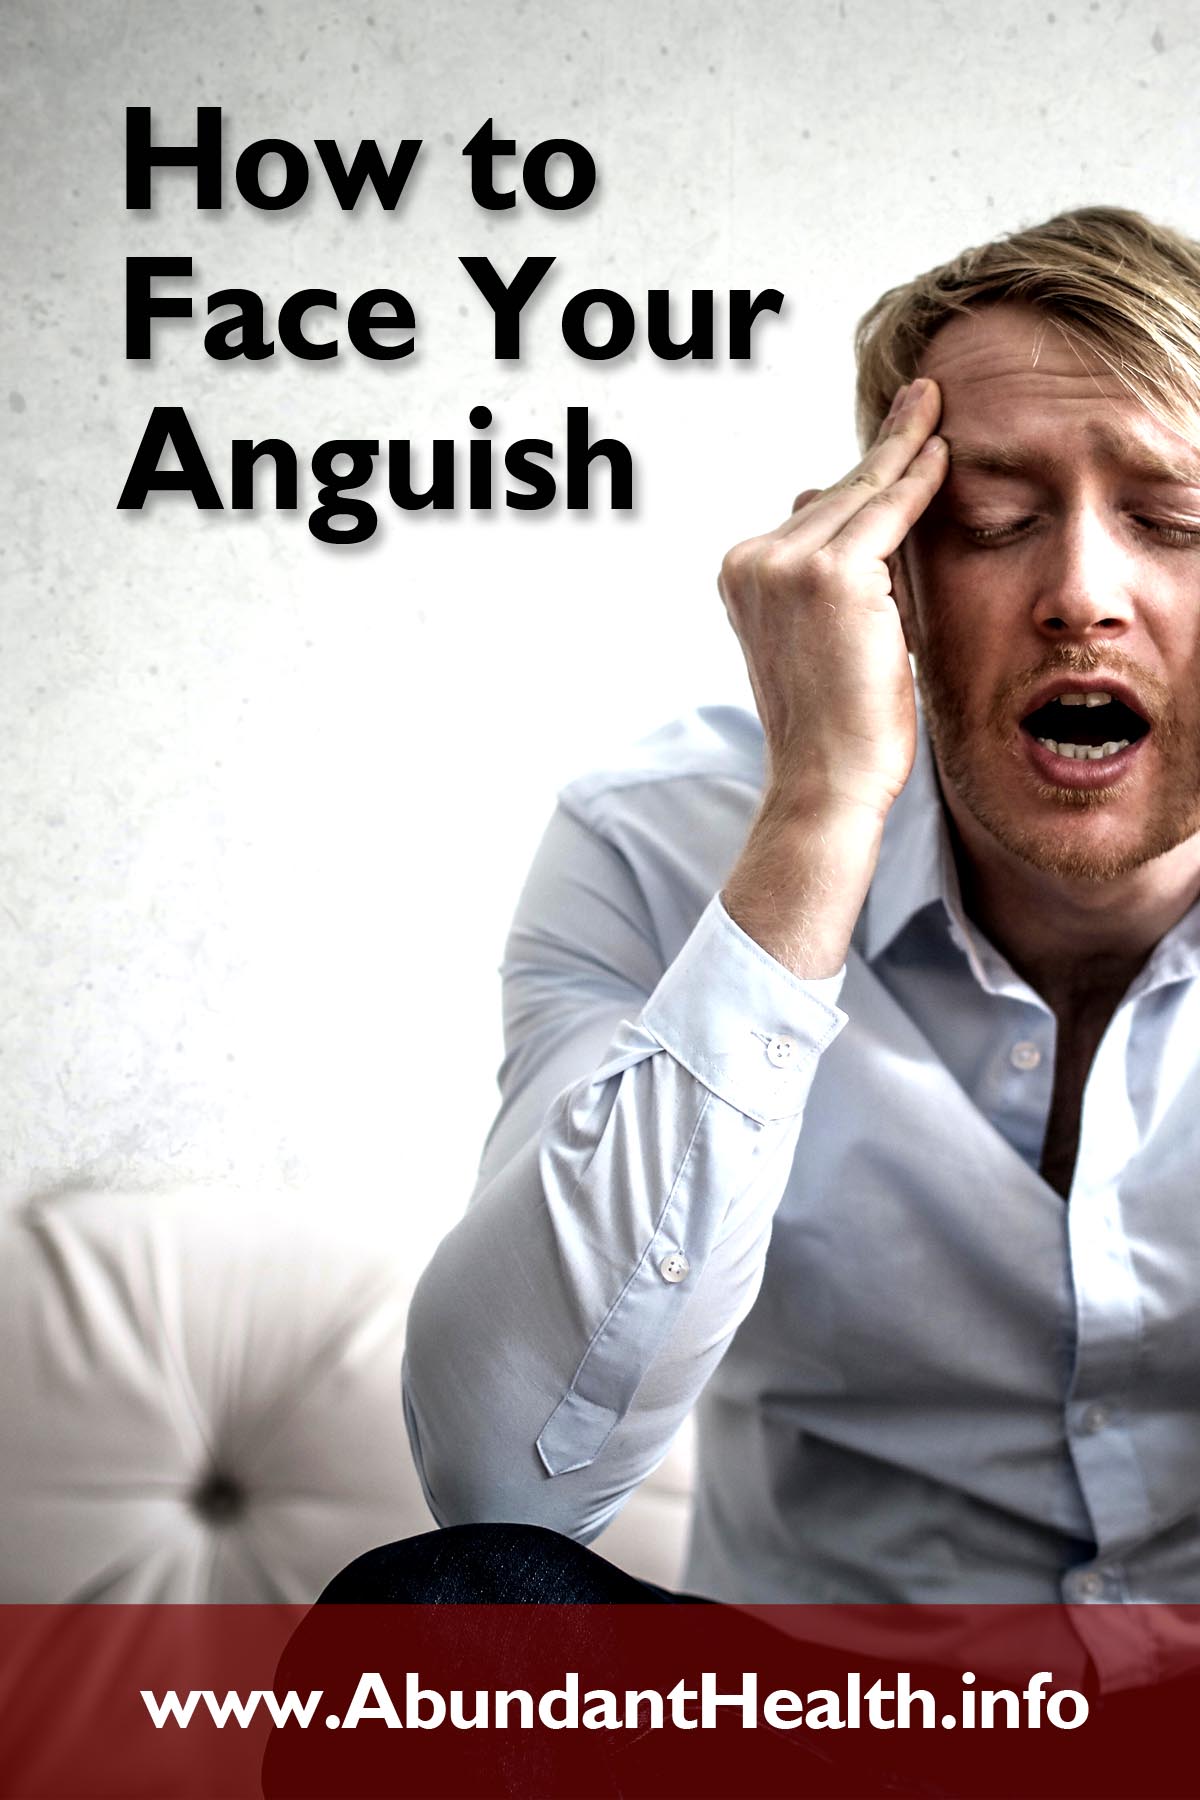 How to Face Your Anguish